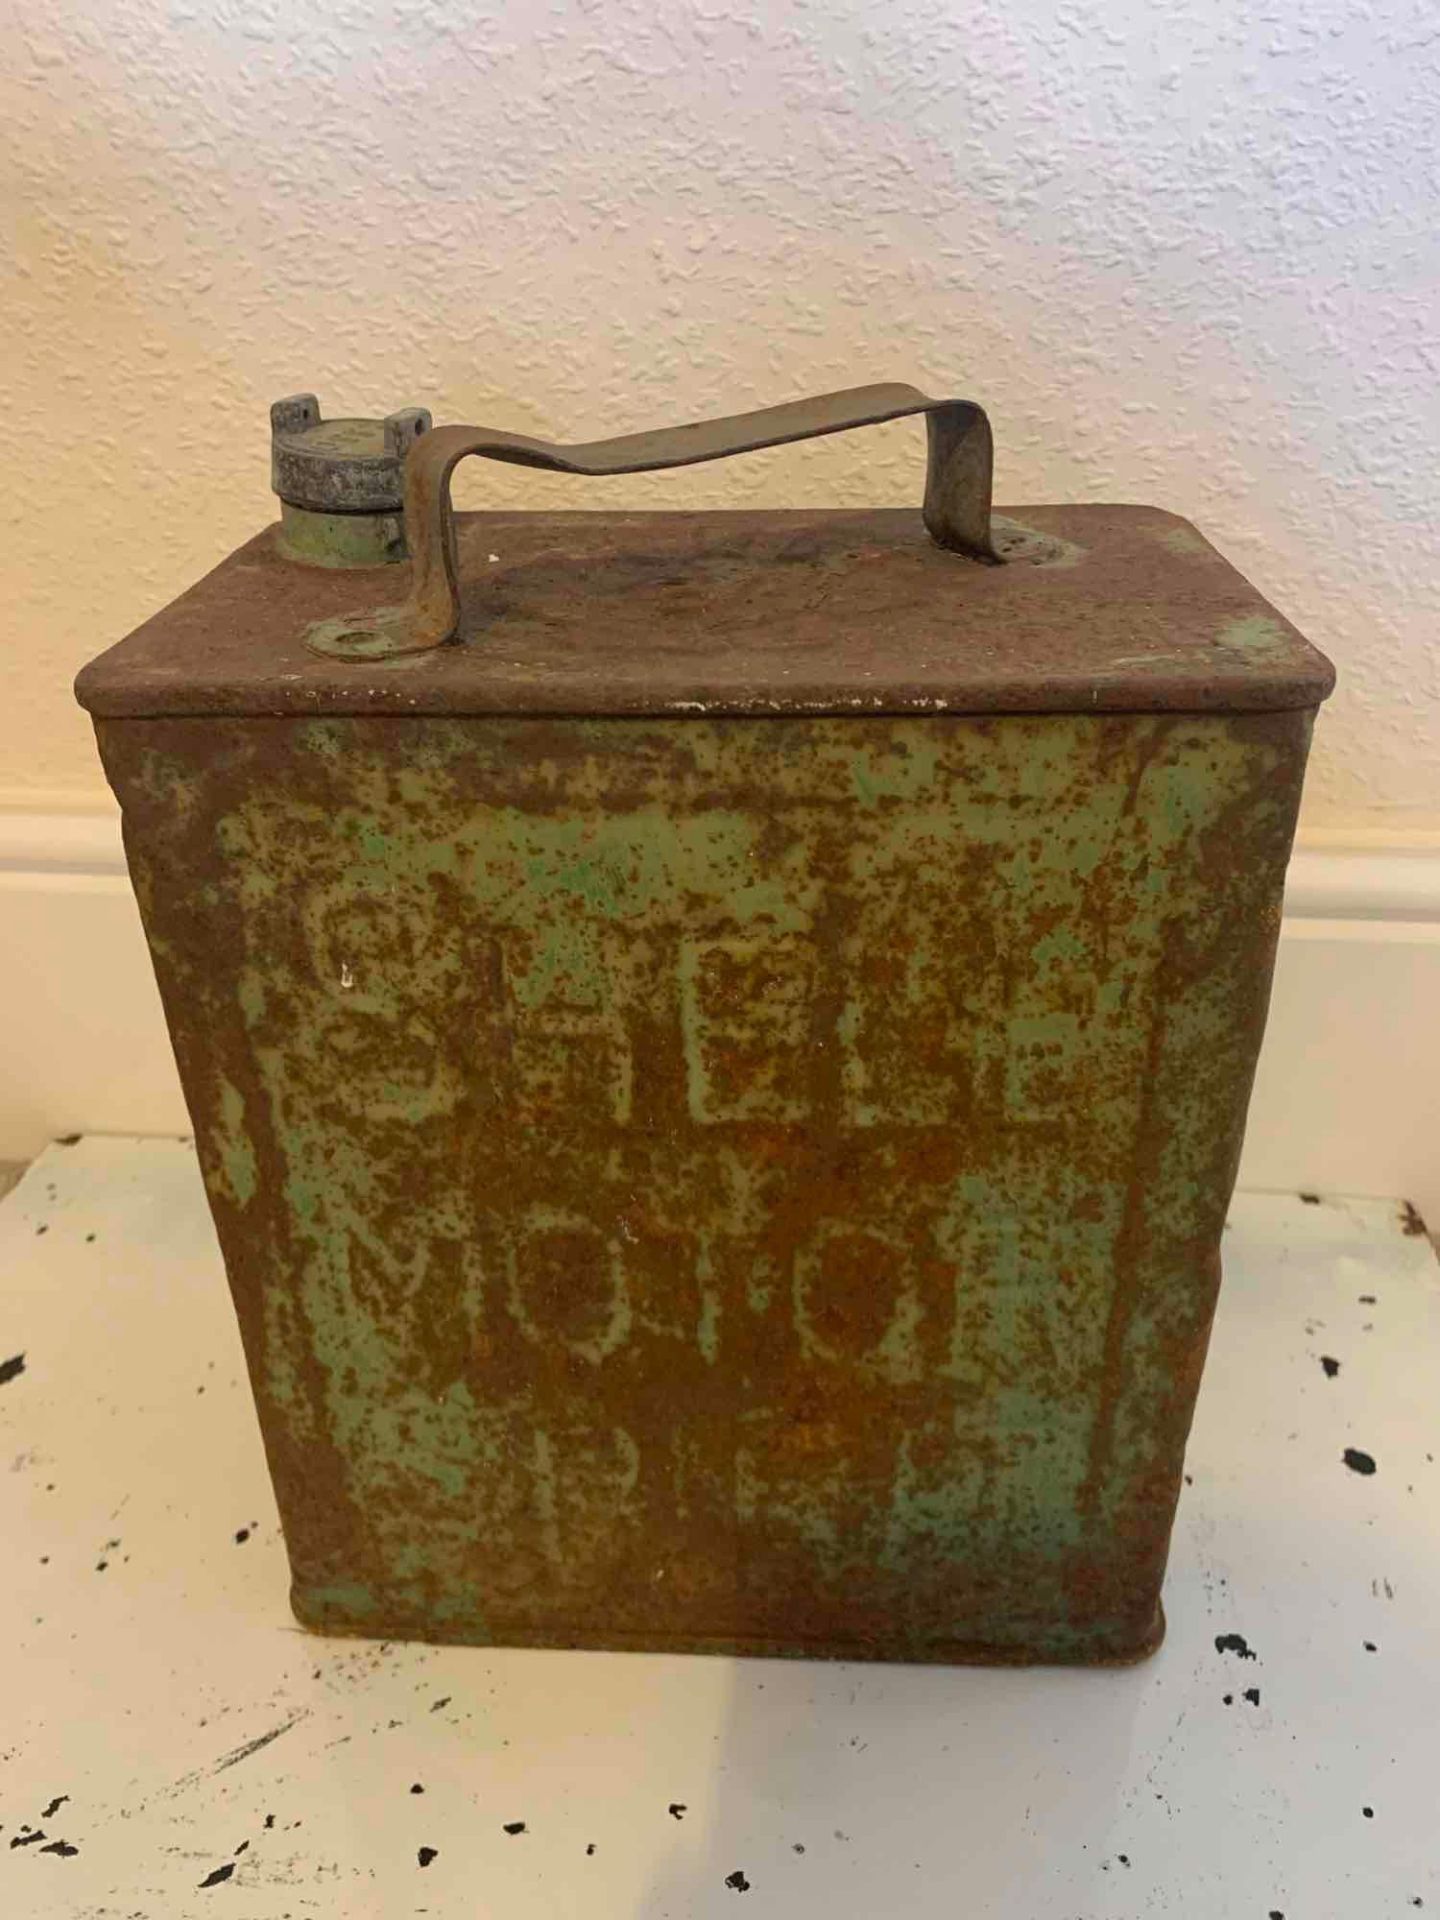 Shell Motor Spirit Metal Petrol Can. With Esso Lid In Original Colours With Significant Rusting - Image 6 of 6